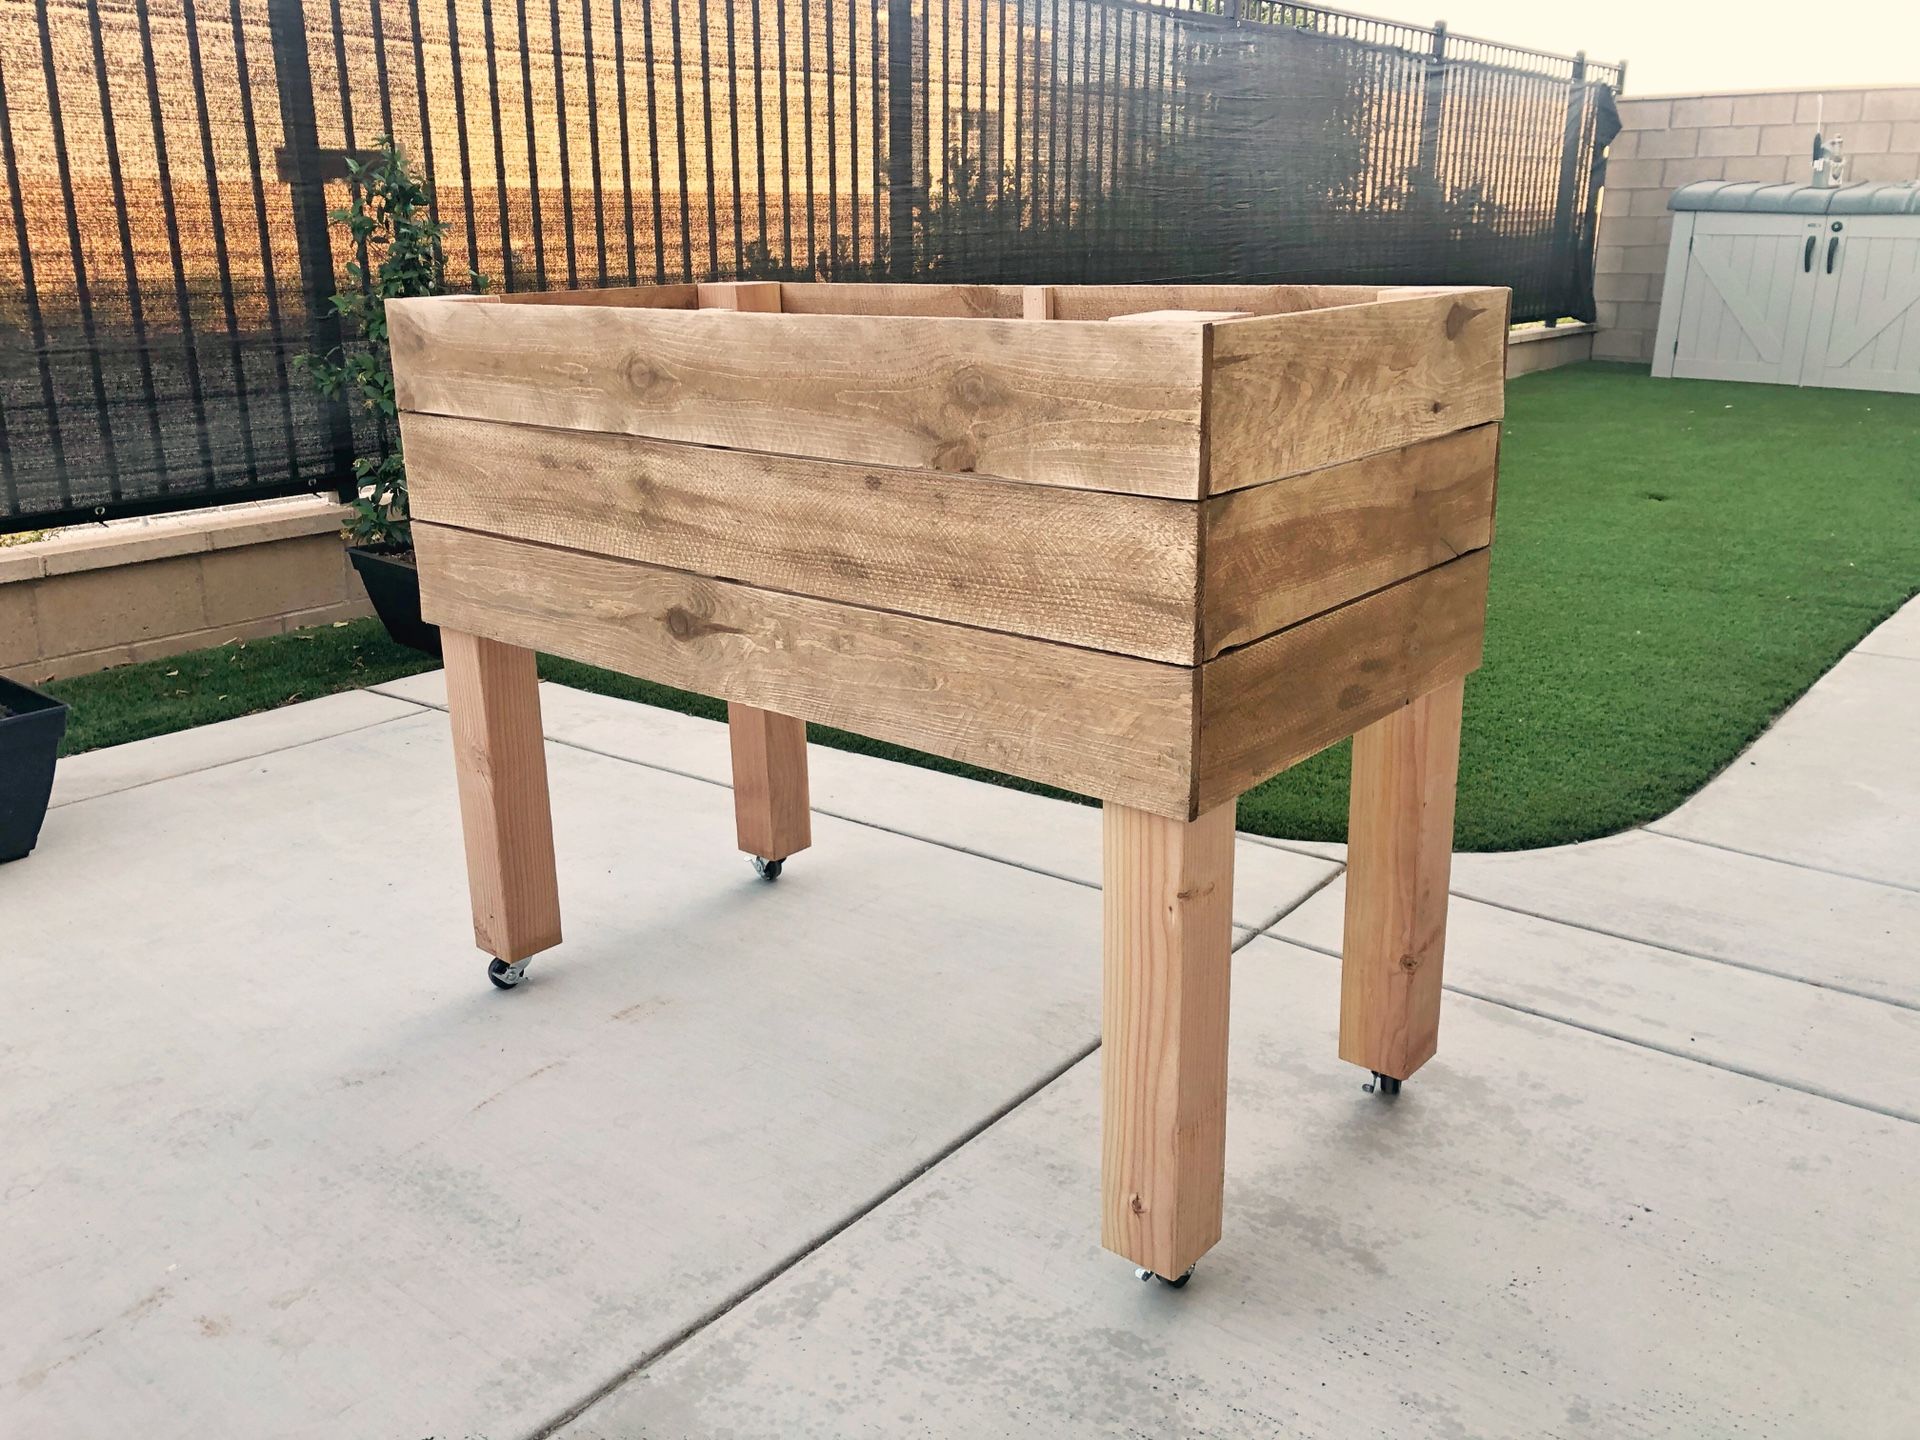 Elevated Garden Planter Box with Wheels